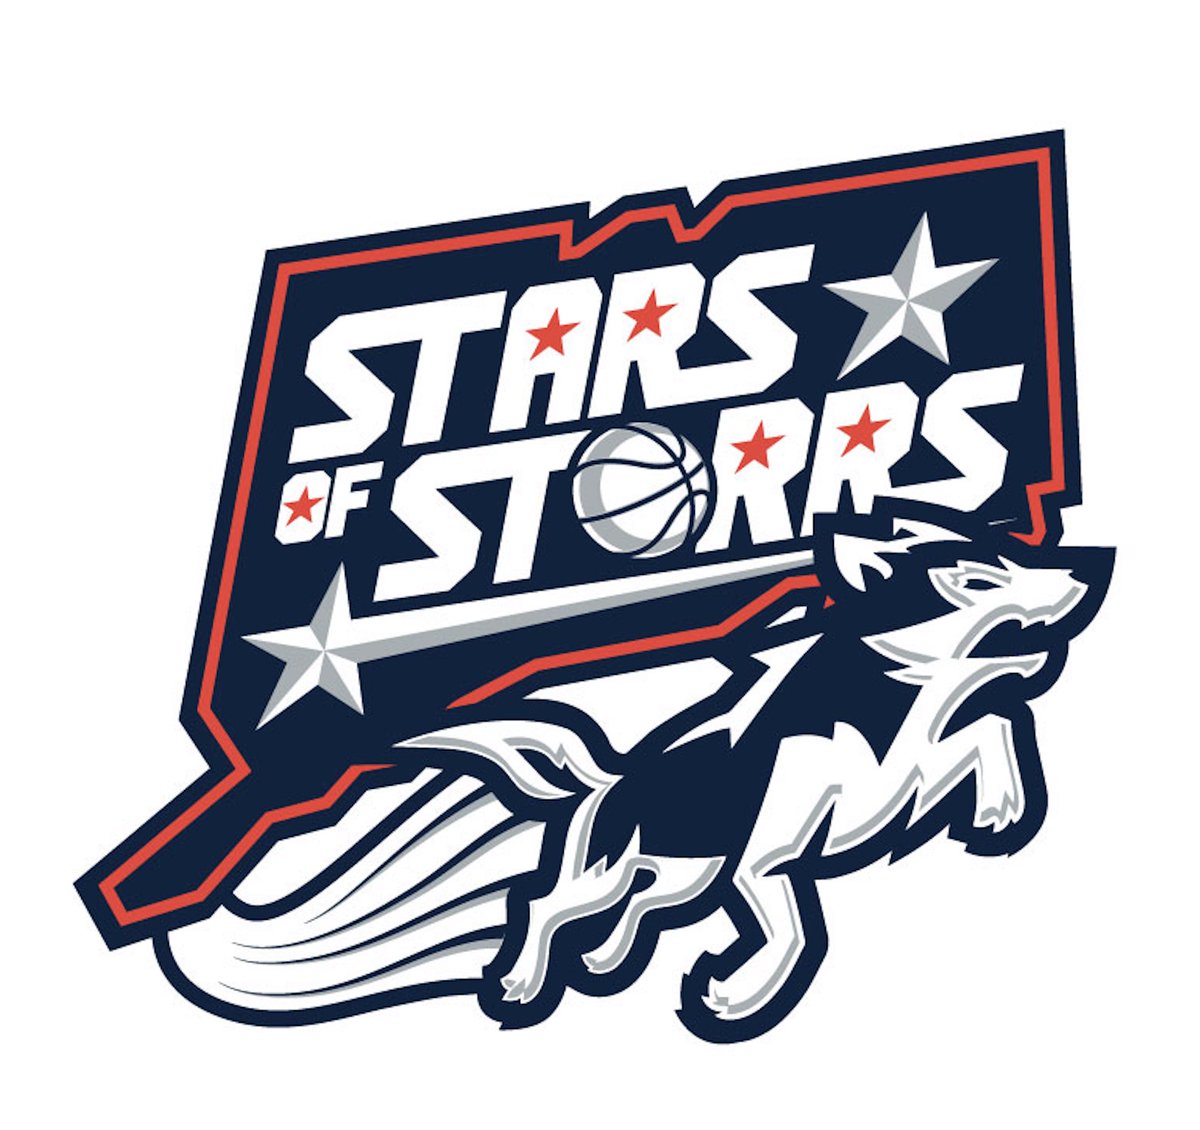 Stars of Storrs TBT $1,000,000 winning prize split: $100,000 to the D’Amelio Huskies NIL Collective. $100,000 to our coaching staff and $800,000 split evenly to the players. @starsofstorrs @thetournament @DamelioHuskies @huskiesalltime1 @Ryanboatright11 @D_Daniels2